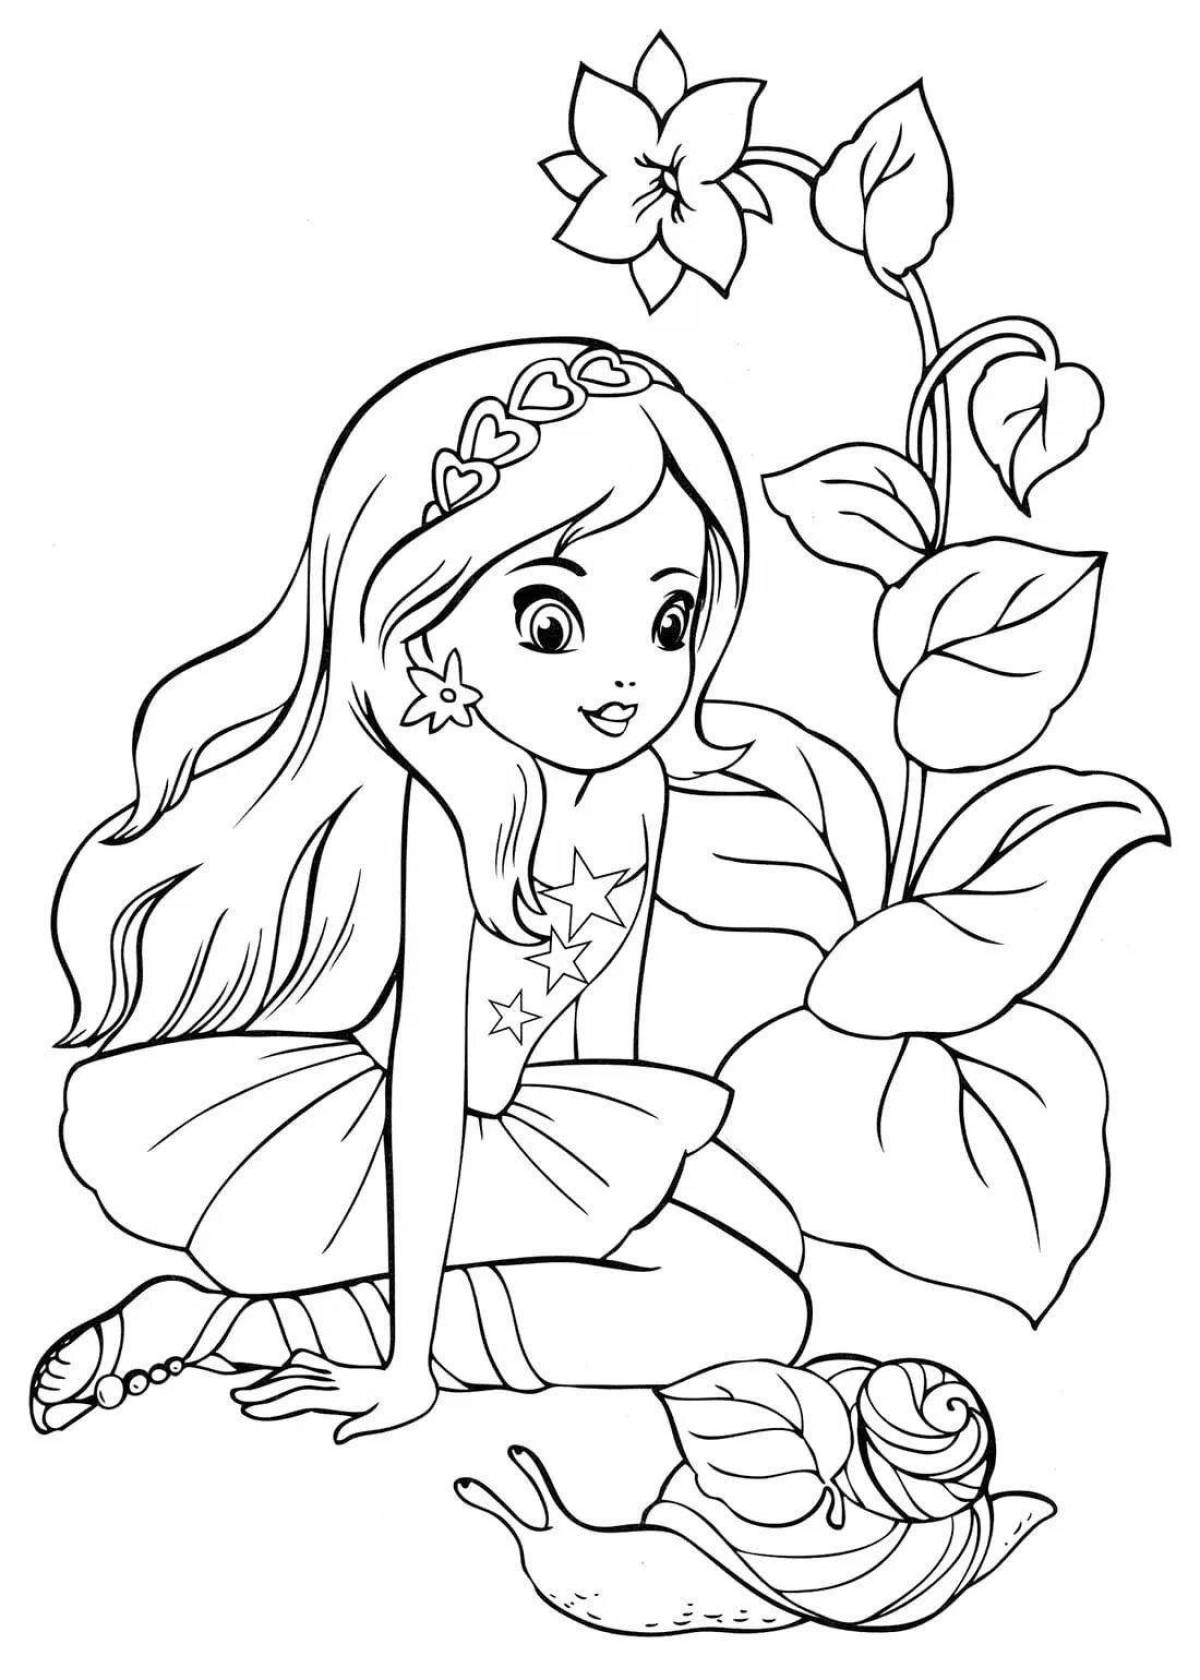 Creative coloring beautiful for girls 5 years old